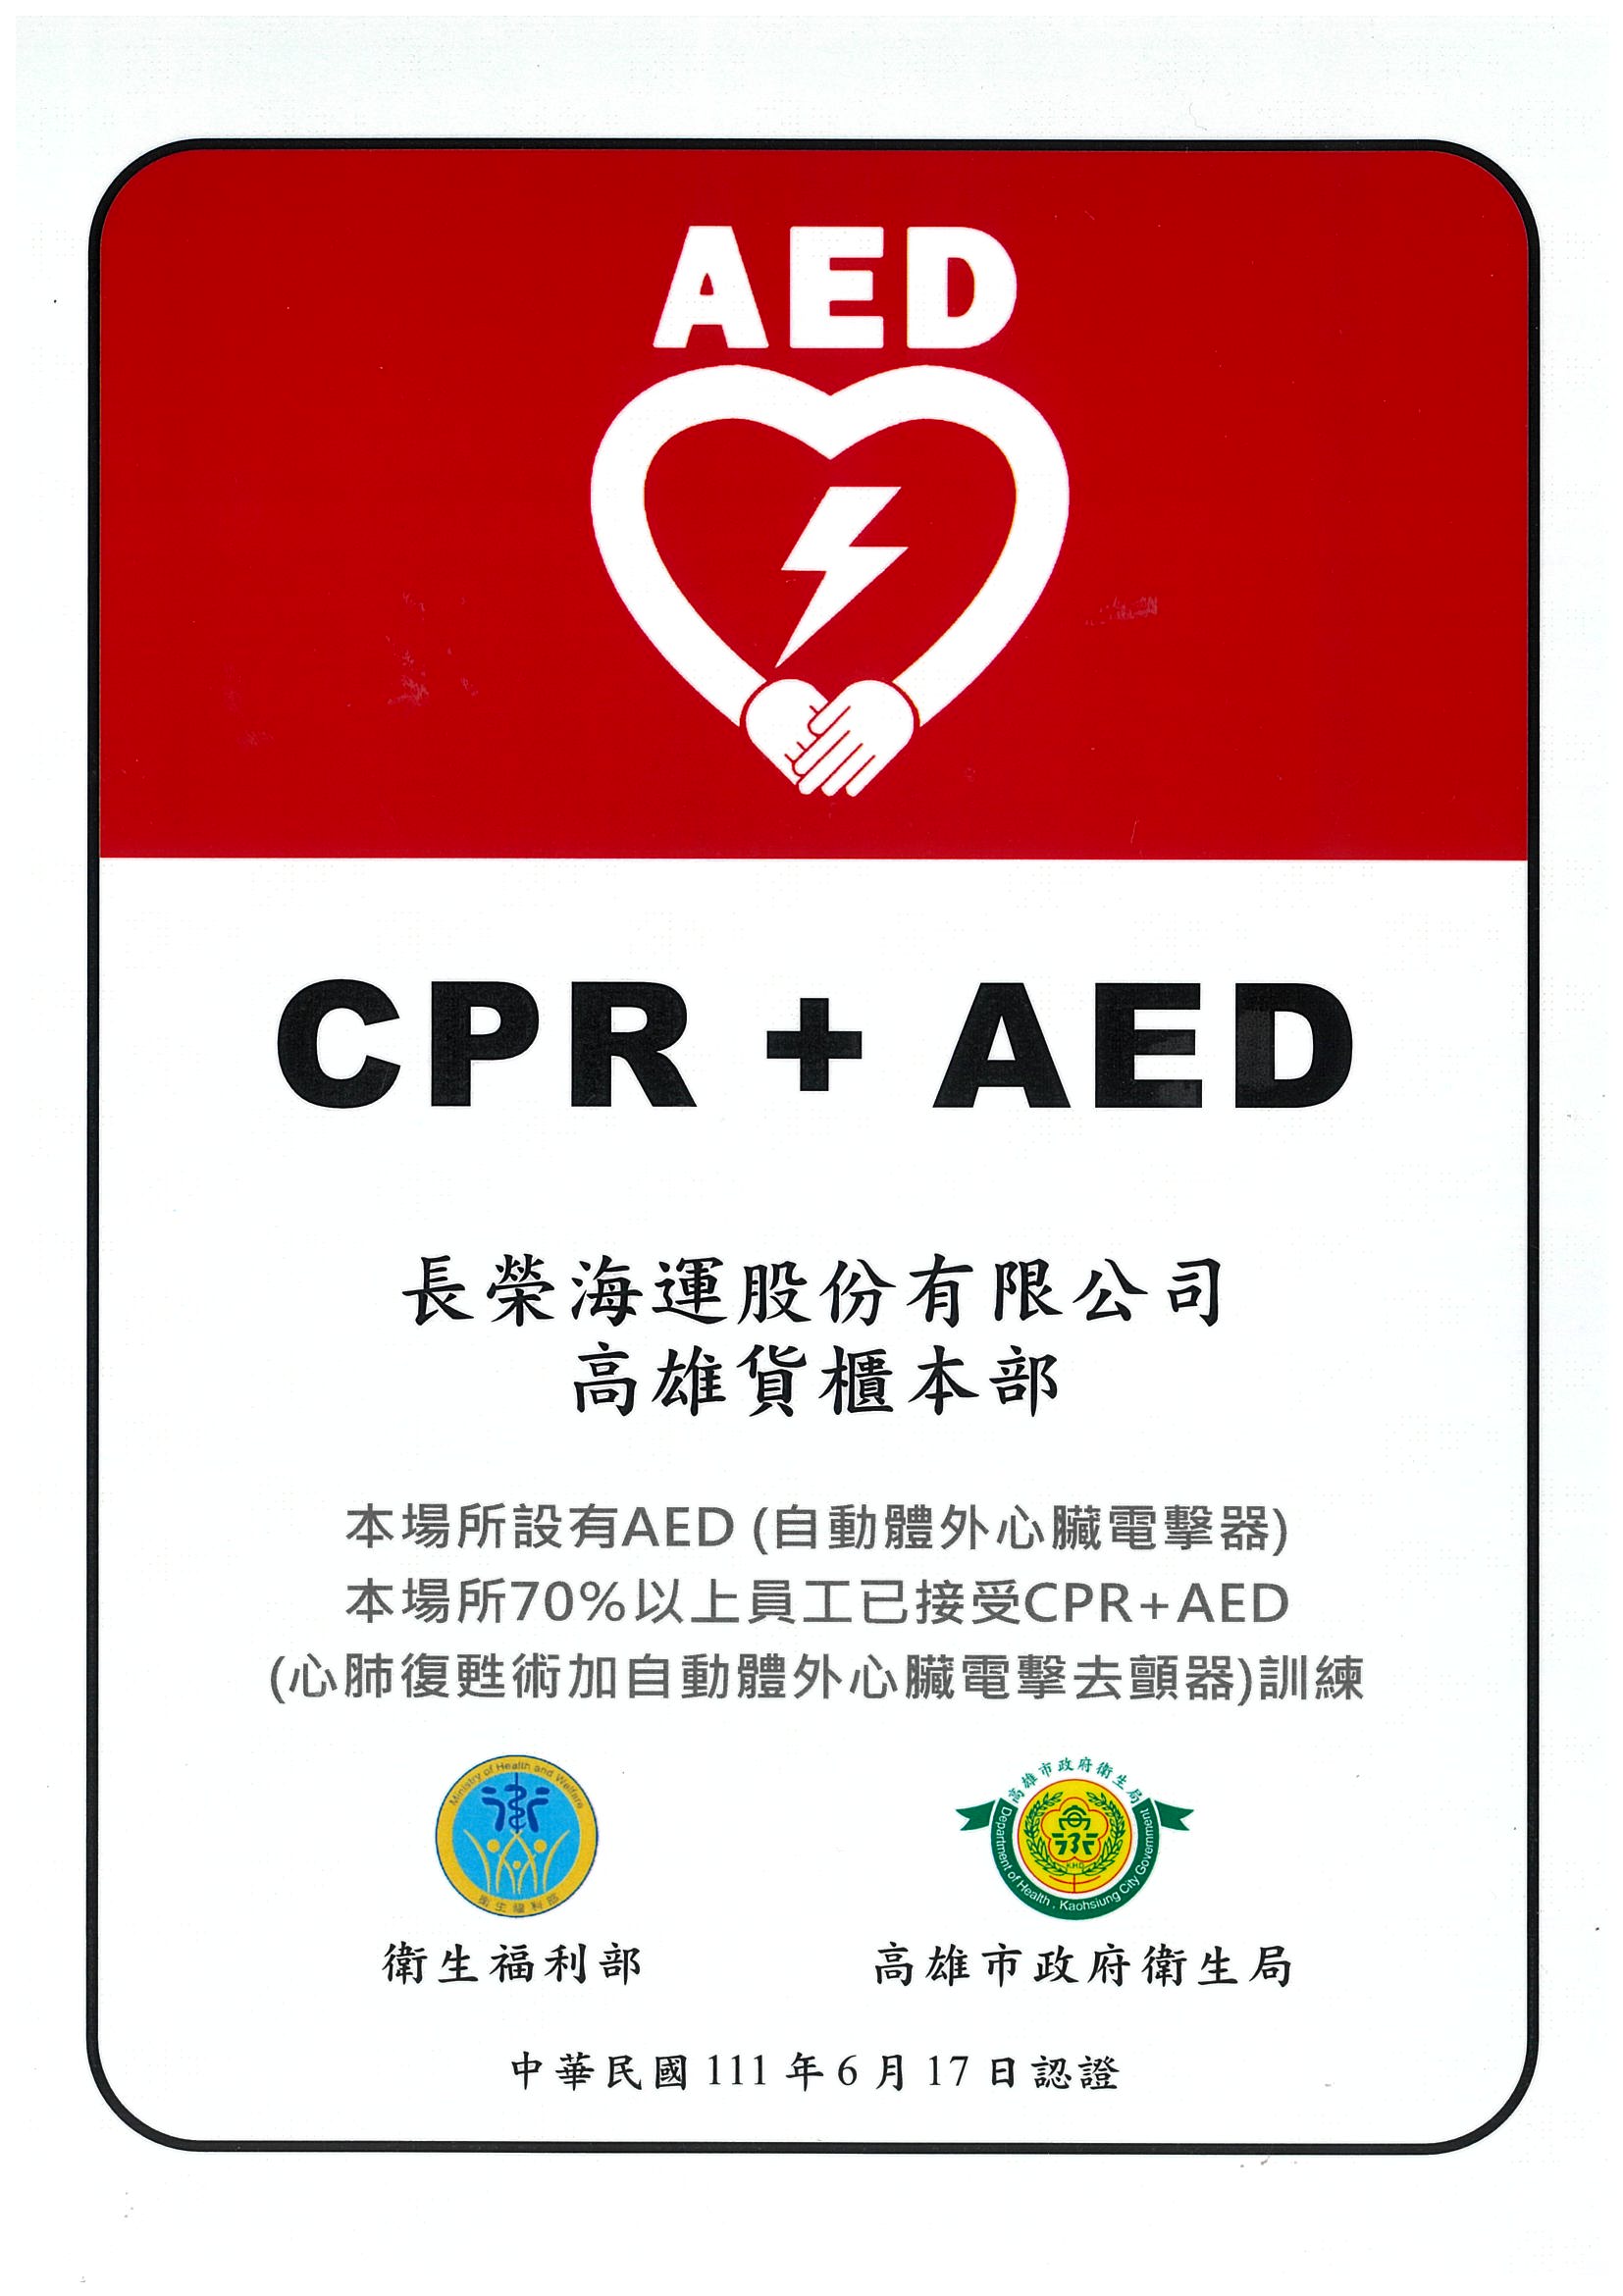 Badge of Accredited Healthy Workplace (AED)